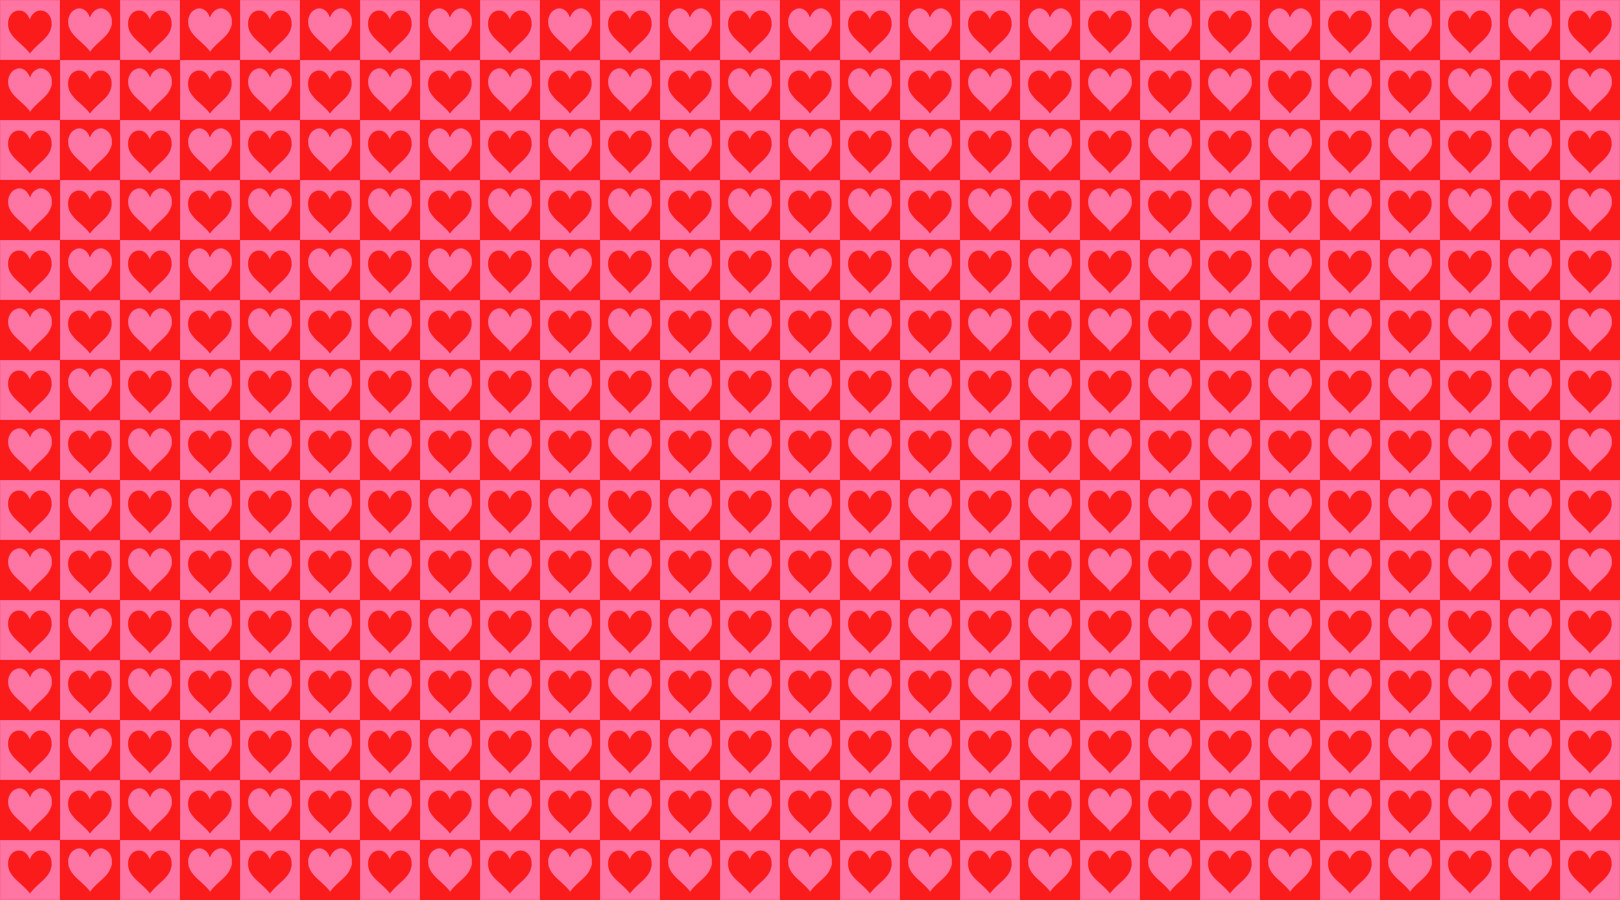 My Valentine S Day Desktop Wallpaper Another House